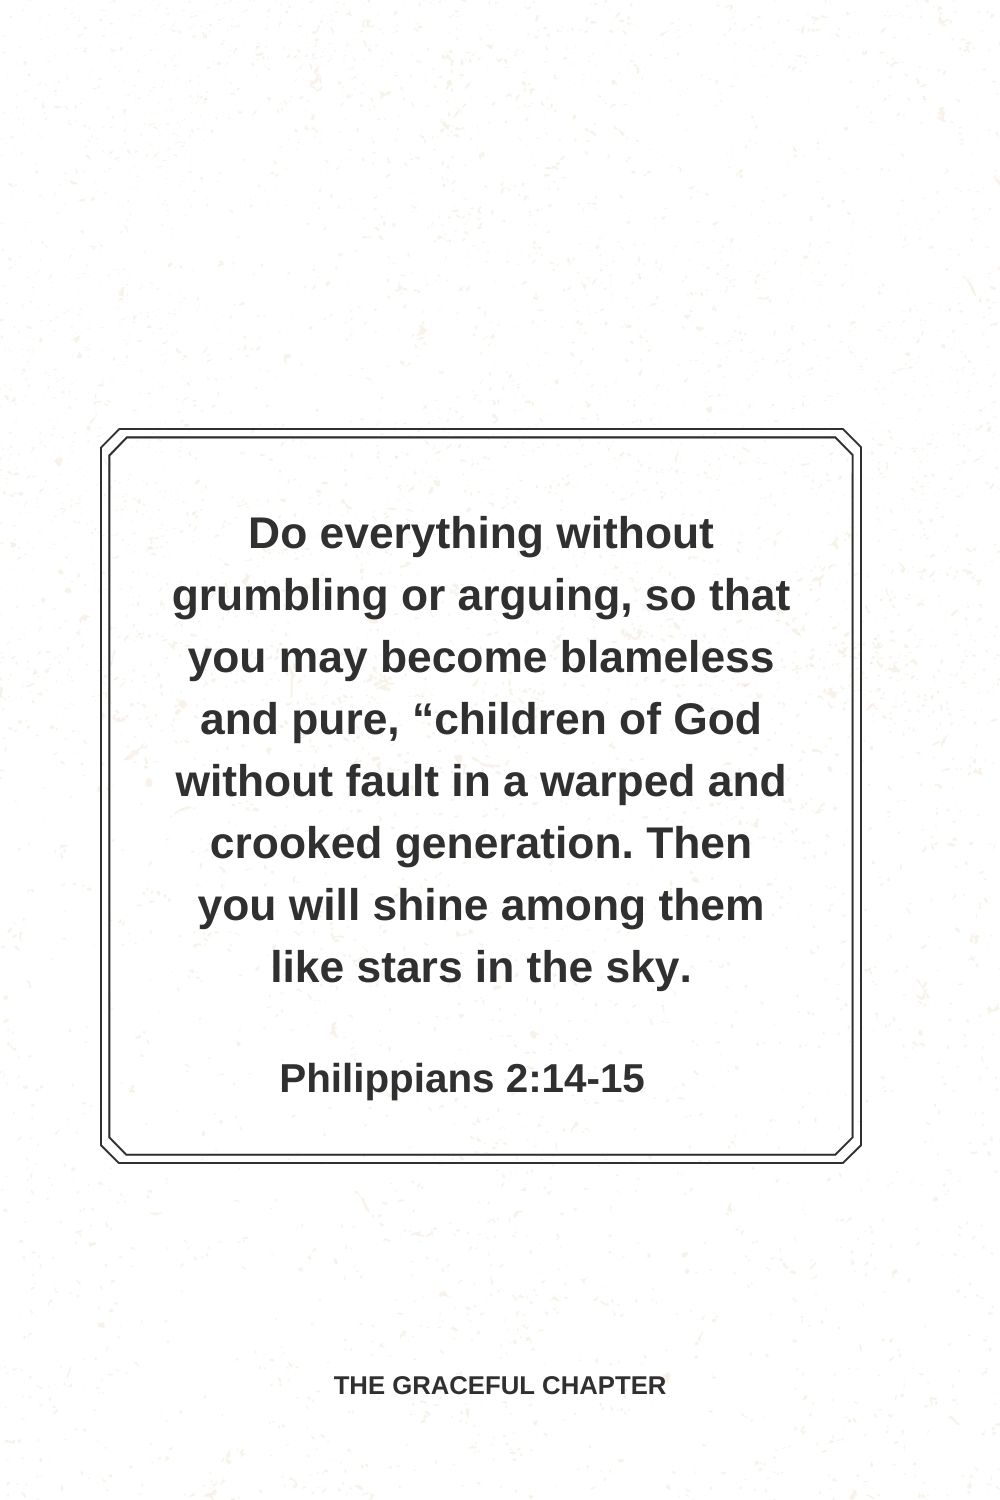 Do everything without grumbling or arguing, so that you may become blameless and pure, “children of God without fault in a warped and crooked generation. Then you will shine among them like stars in the sky. Philippians 2:14-15